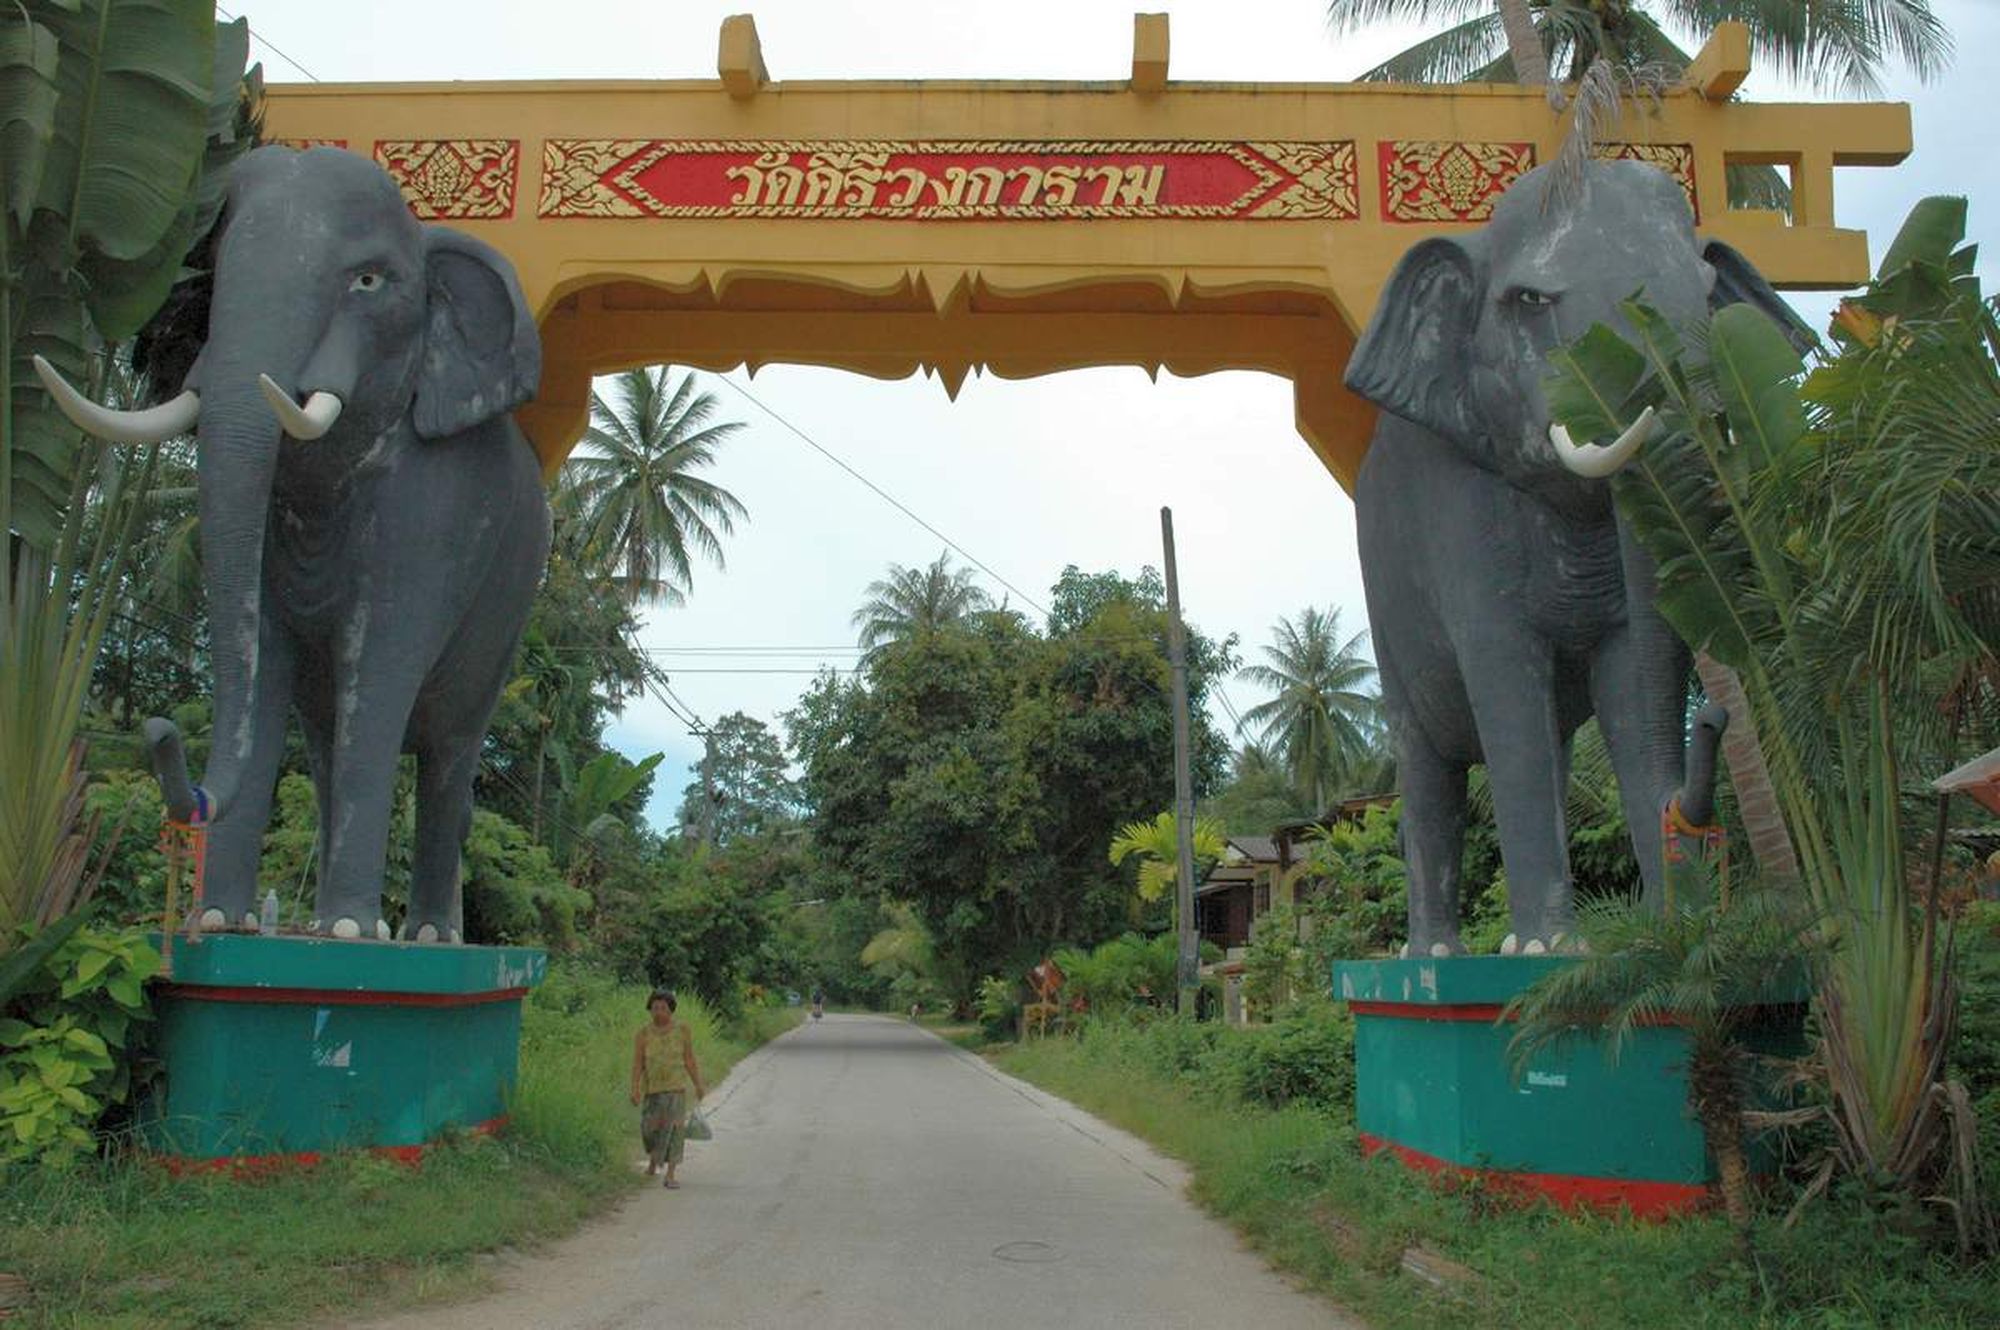 Elephant Gate Entrance to Ban Taling Ngam off of highway 4170.